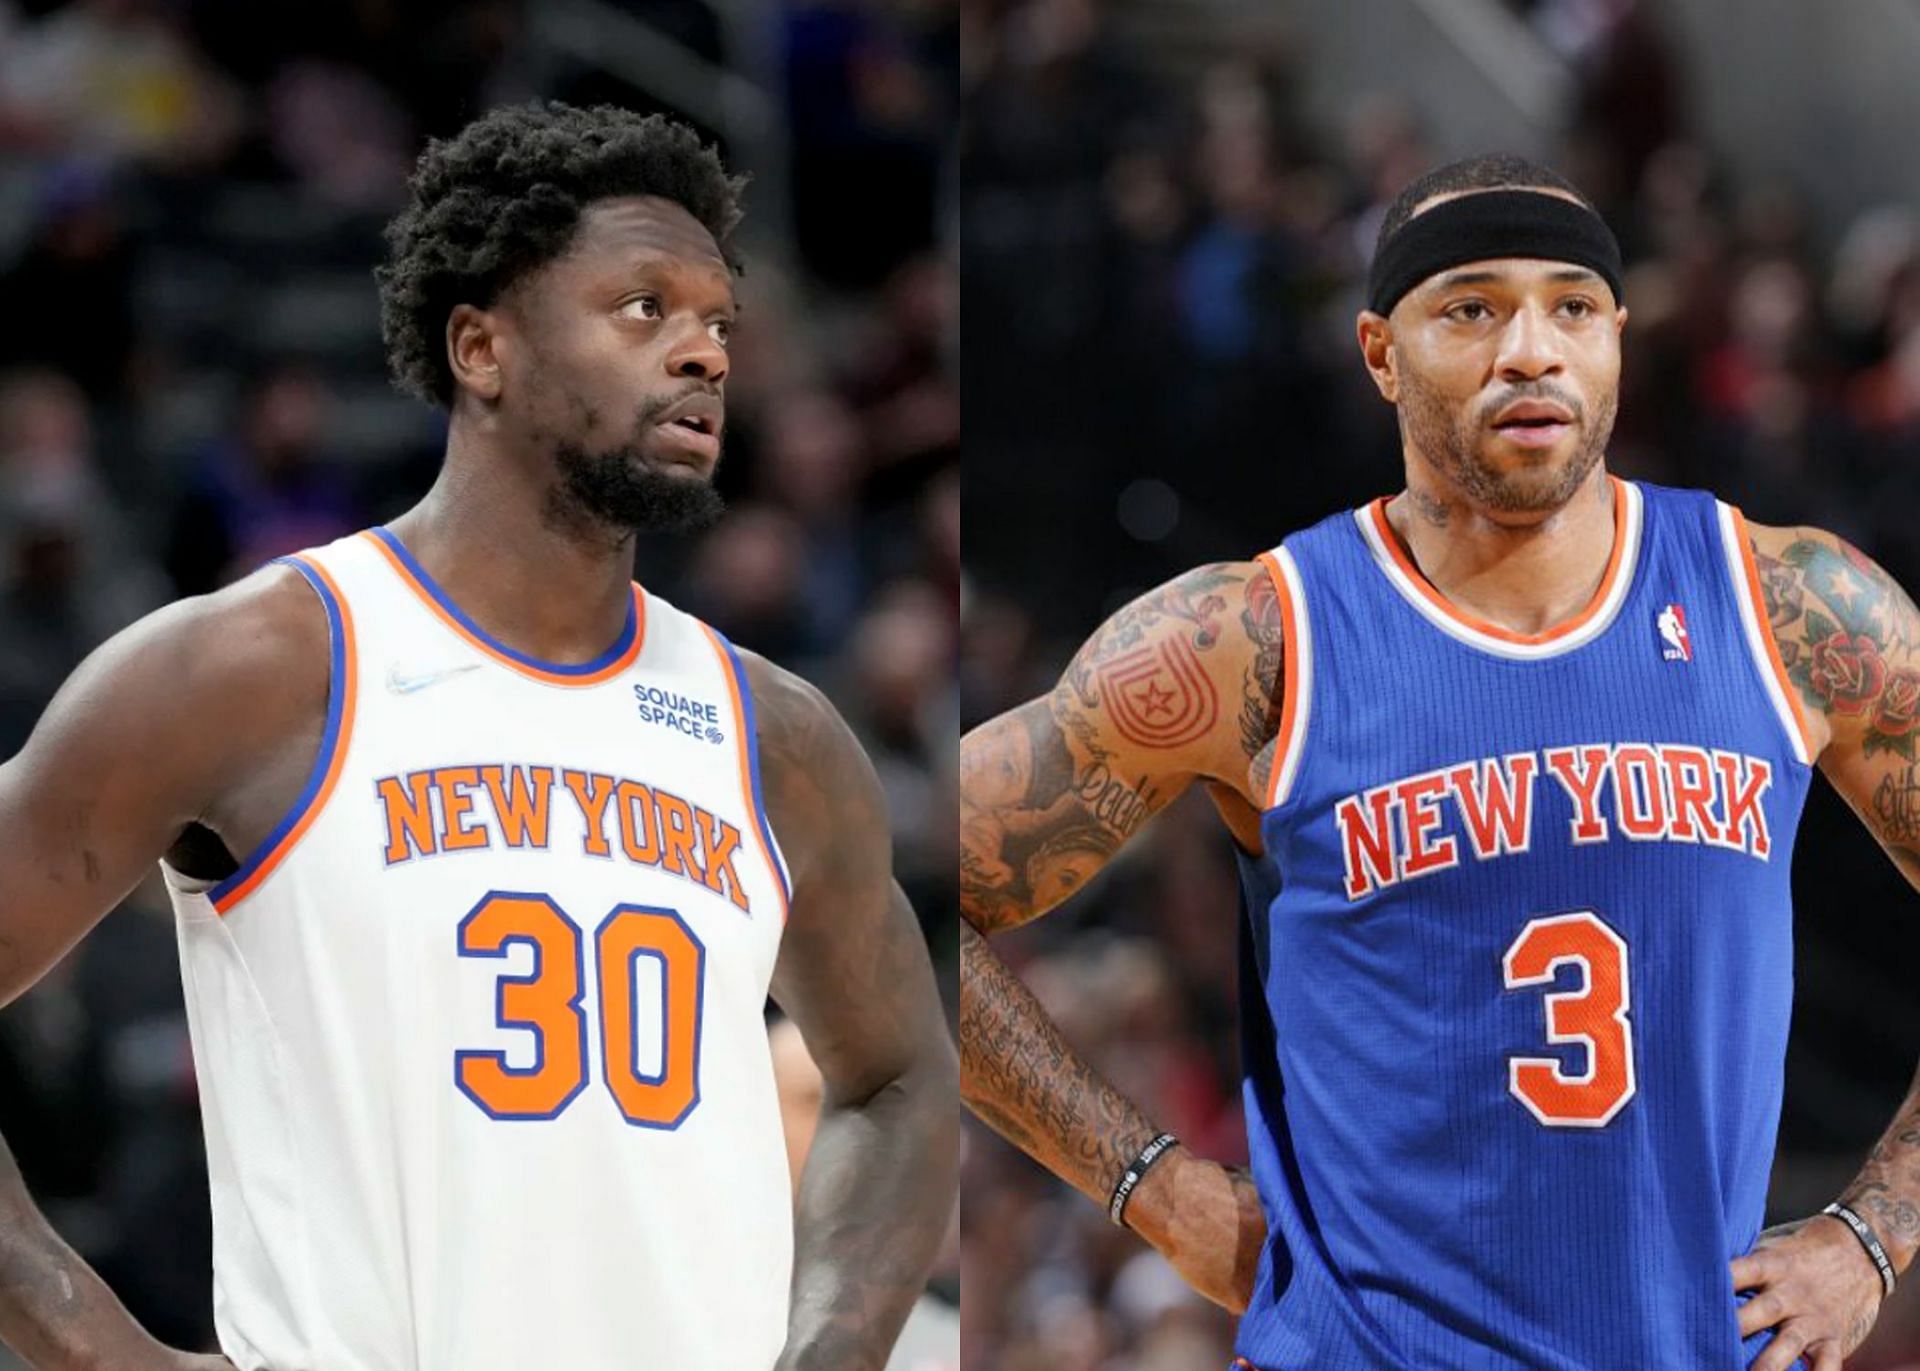 Kenyon Martin rips Julius Randle for kissing wife after Knicks win